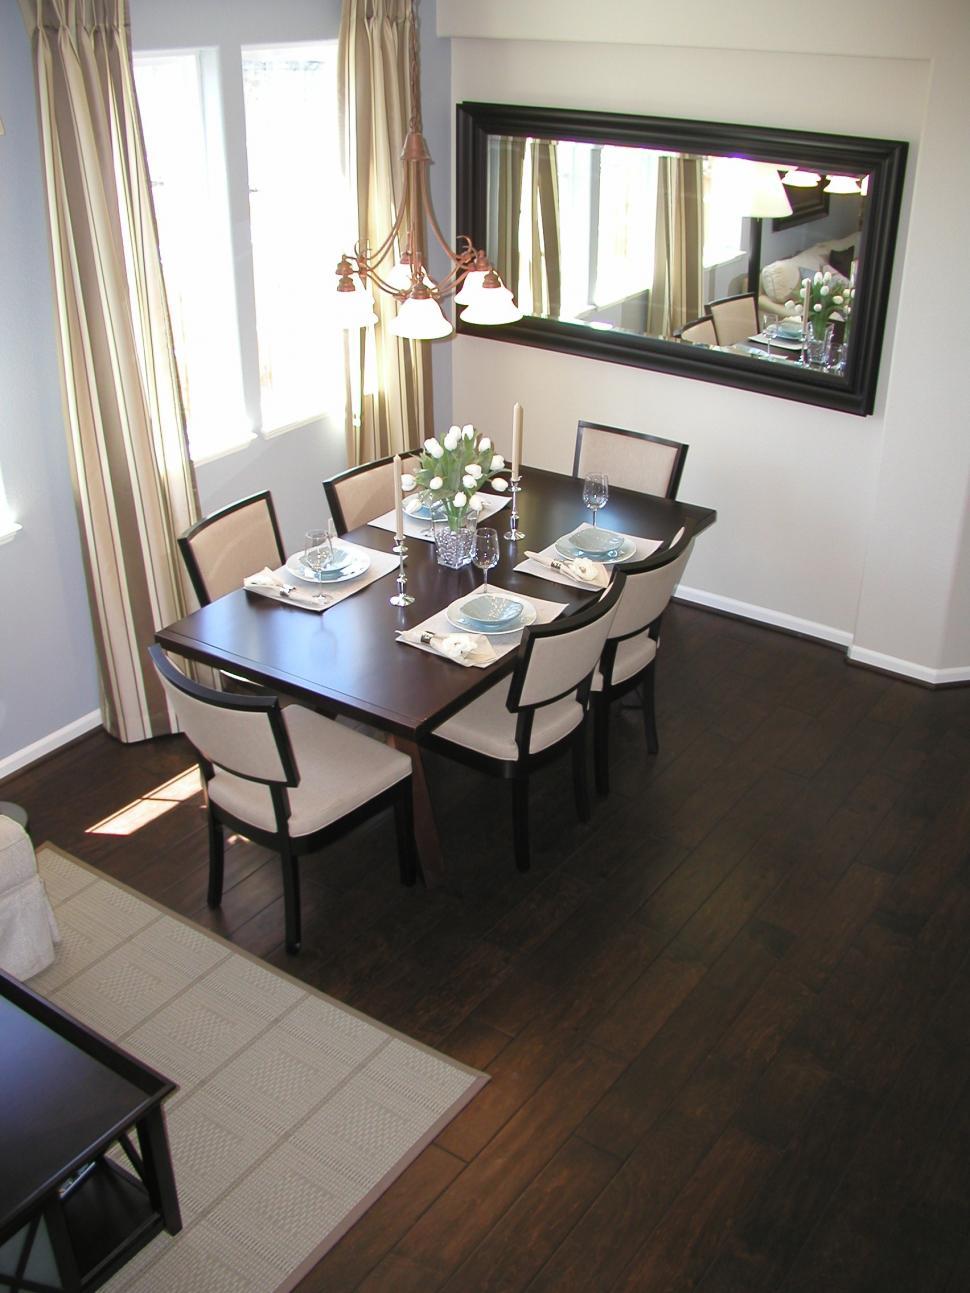 Free Image of Dining Room 